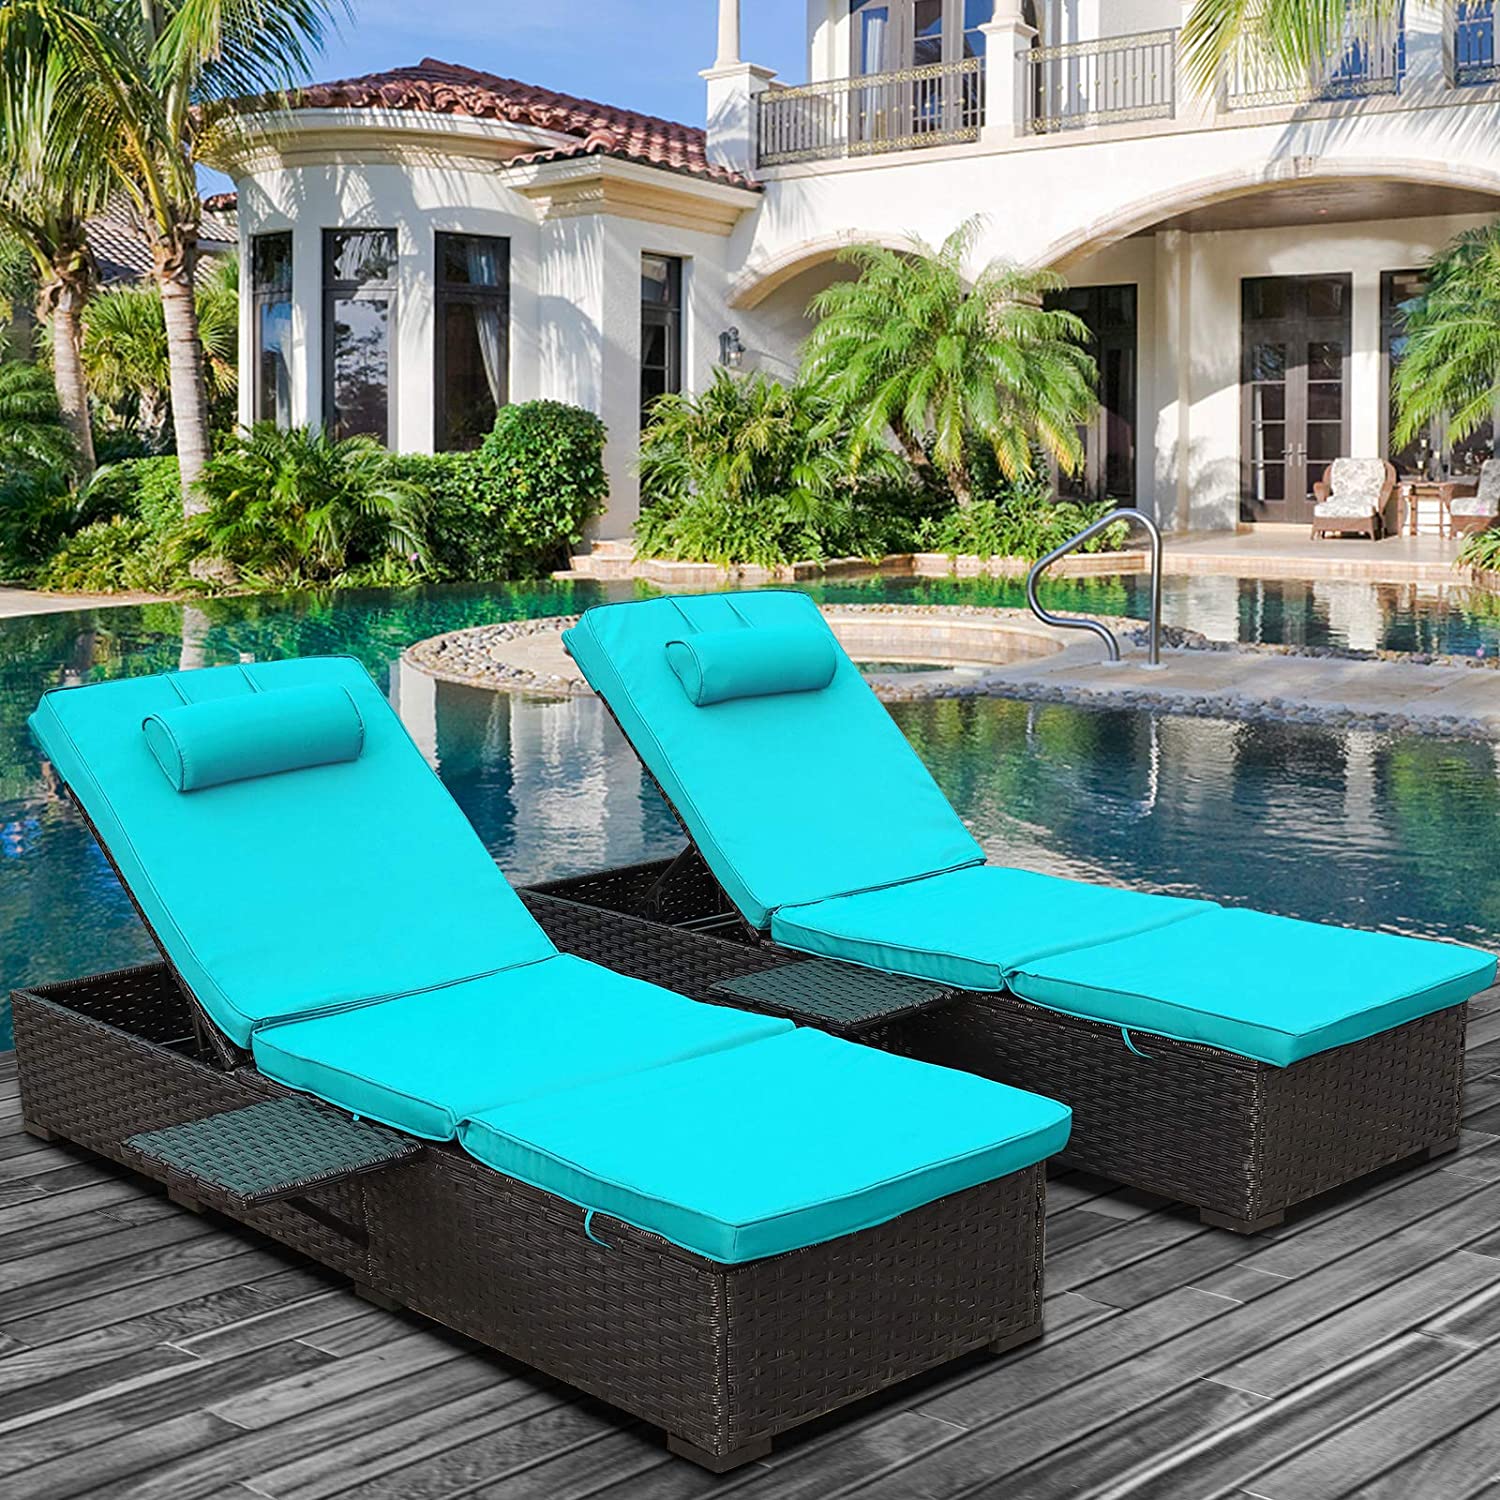 WAROOM Outdoor PE Wicker Patio Chaise Lounge, 2-Pack